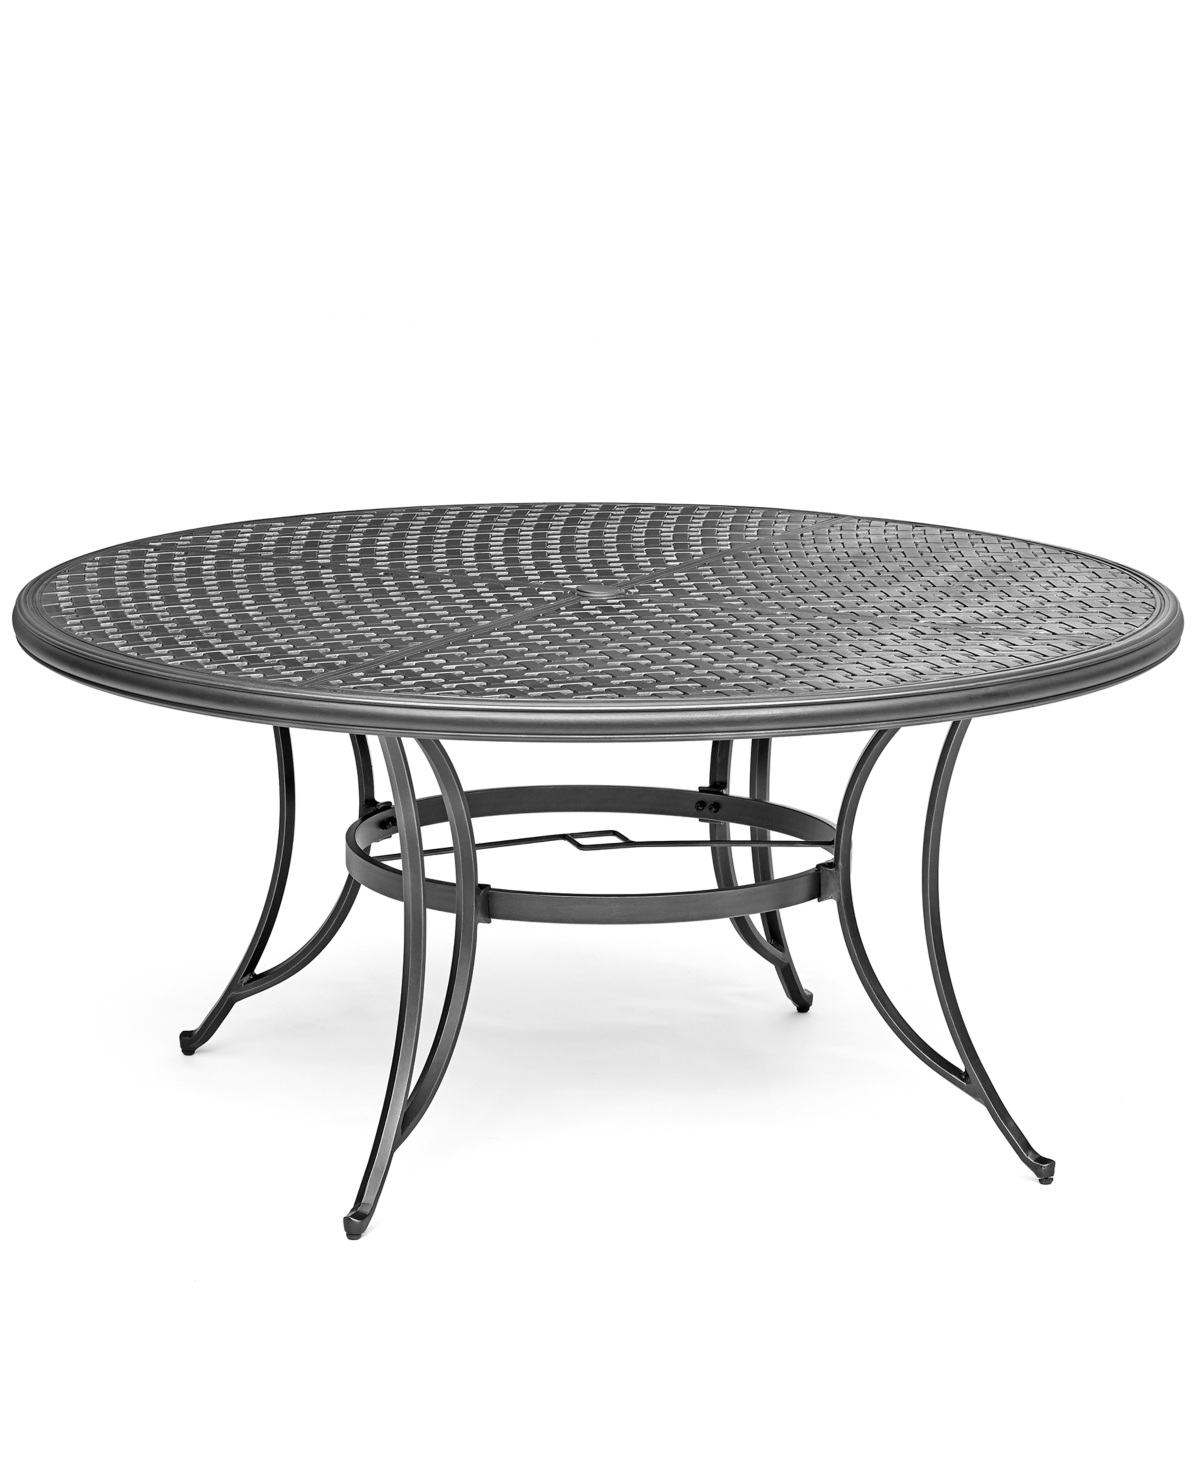 Vintage Ii 61 Round Outdoor Table, Created for Macys